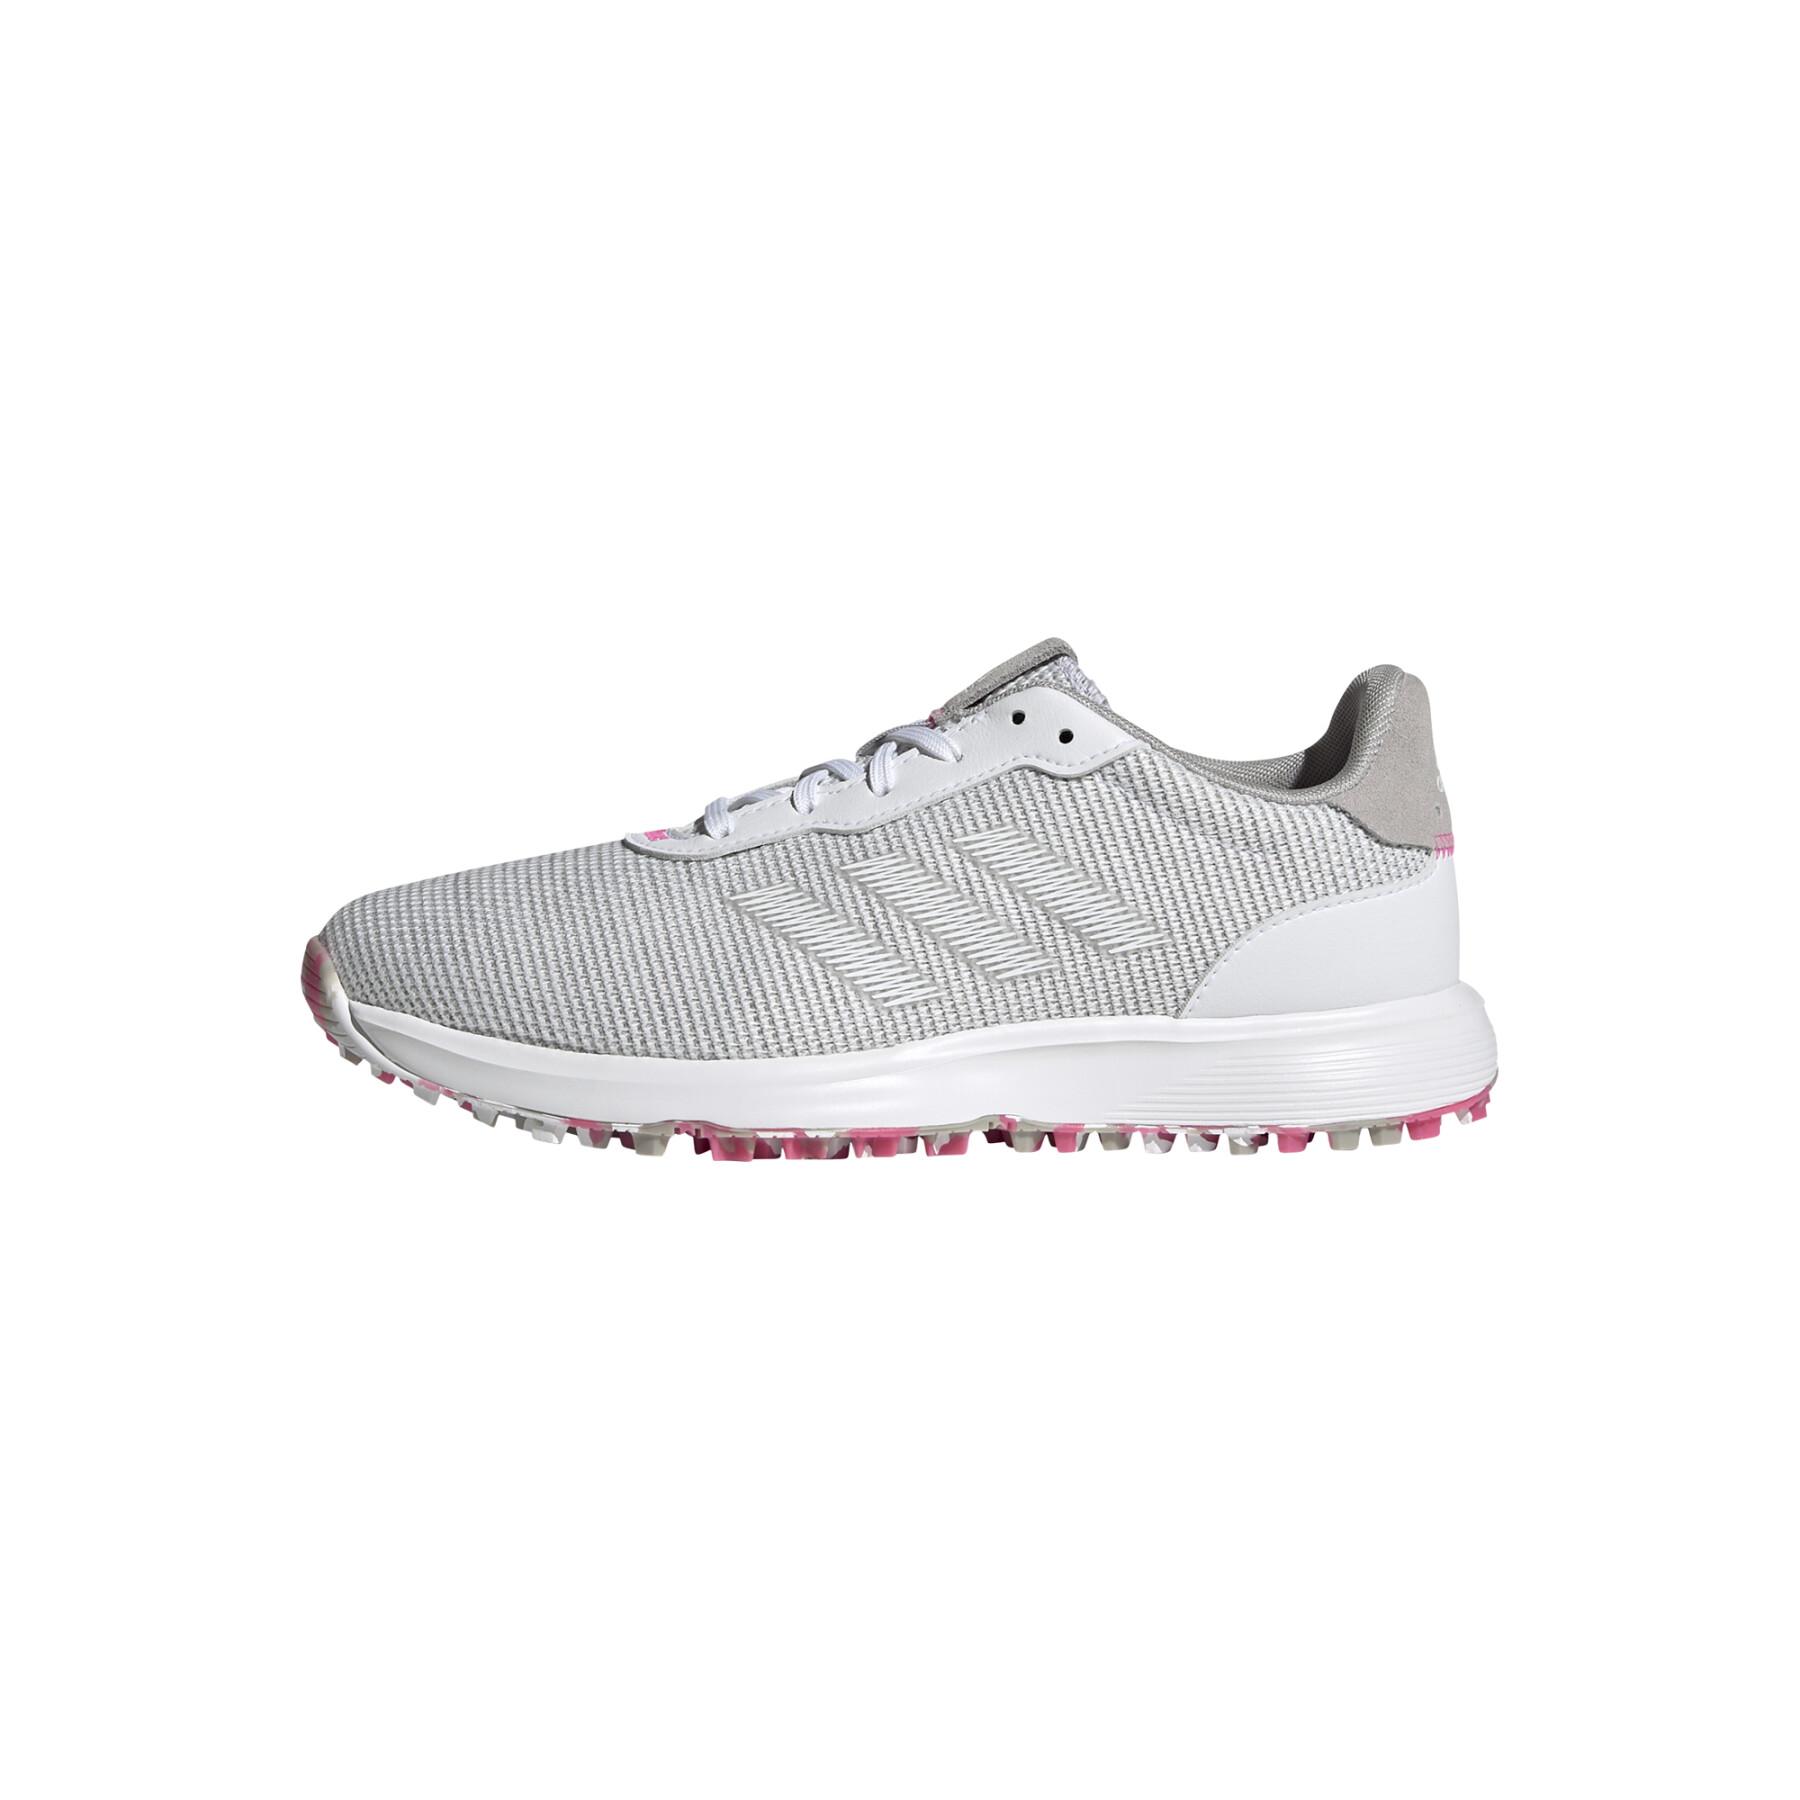 Chaussures femme adidas S2G